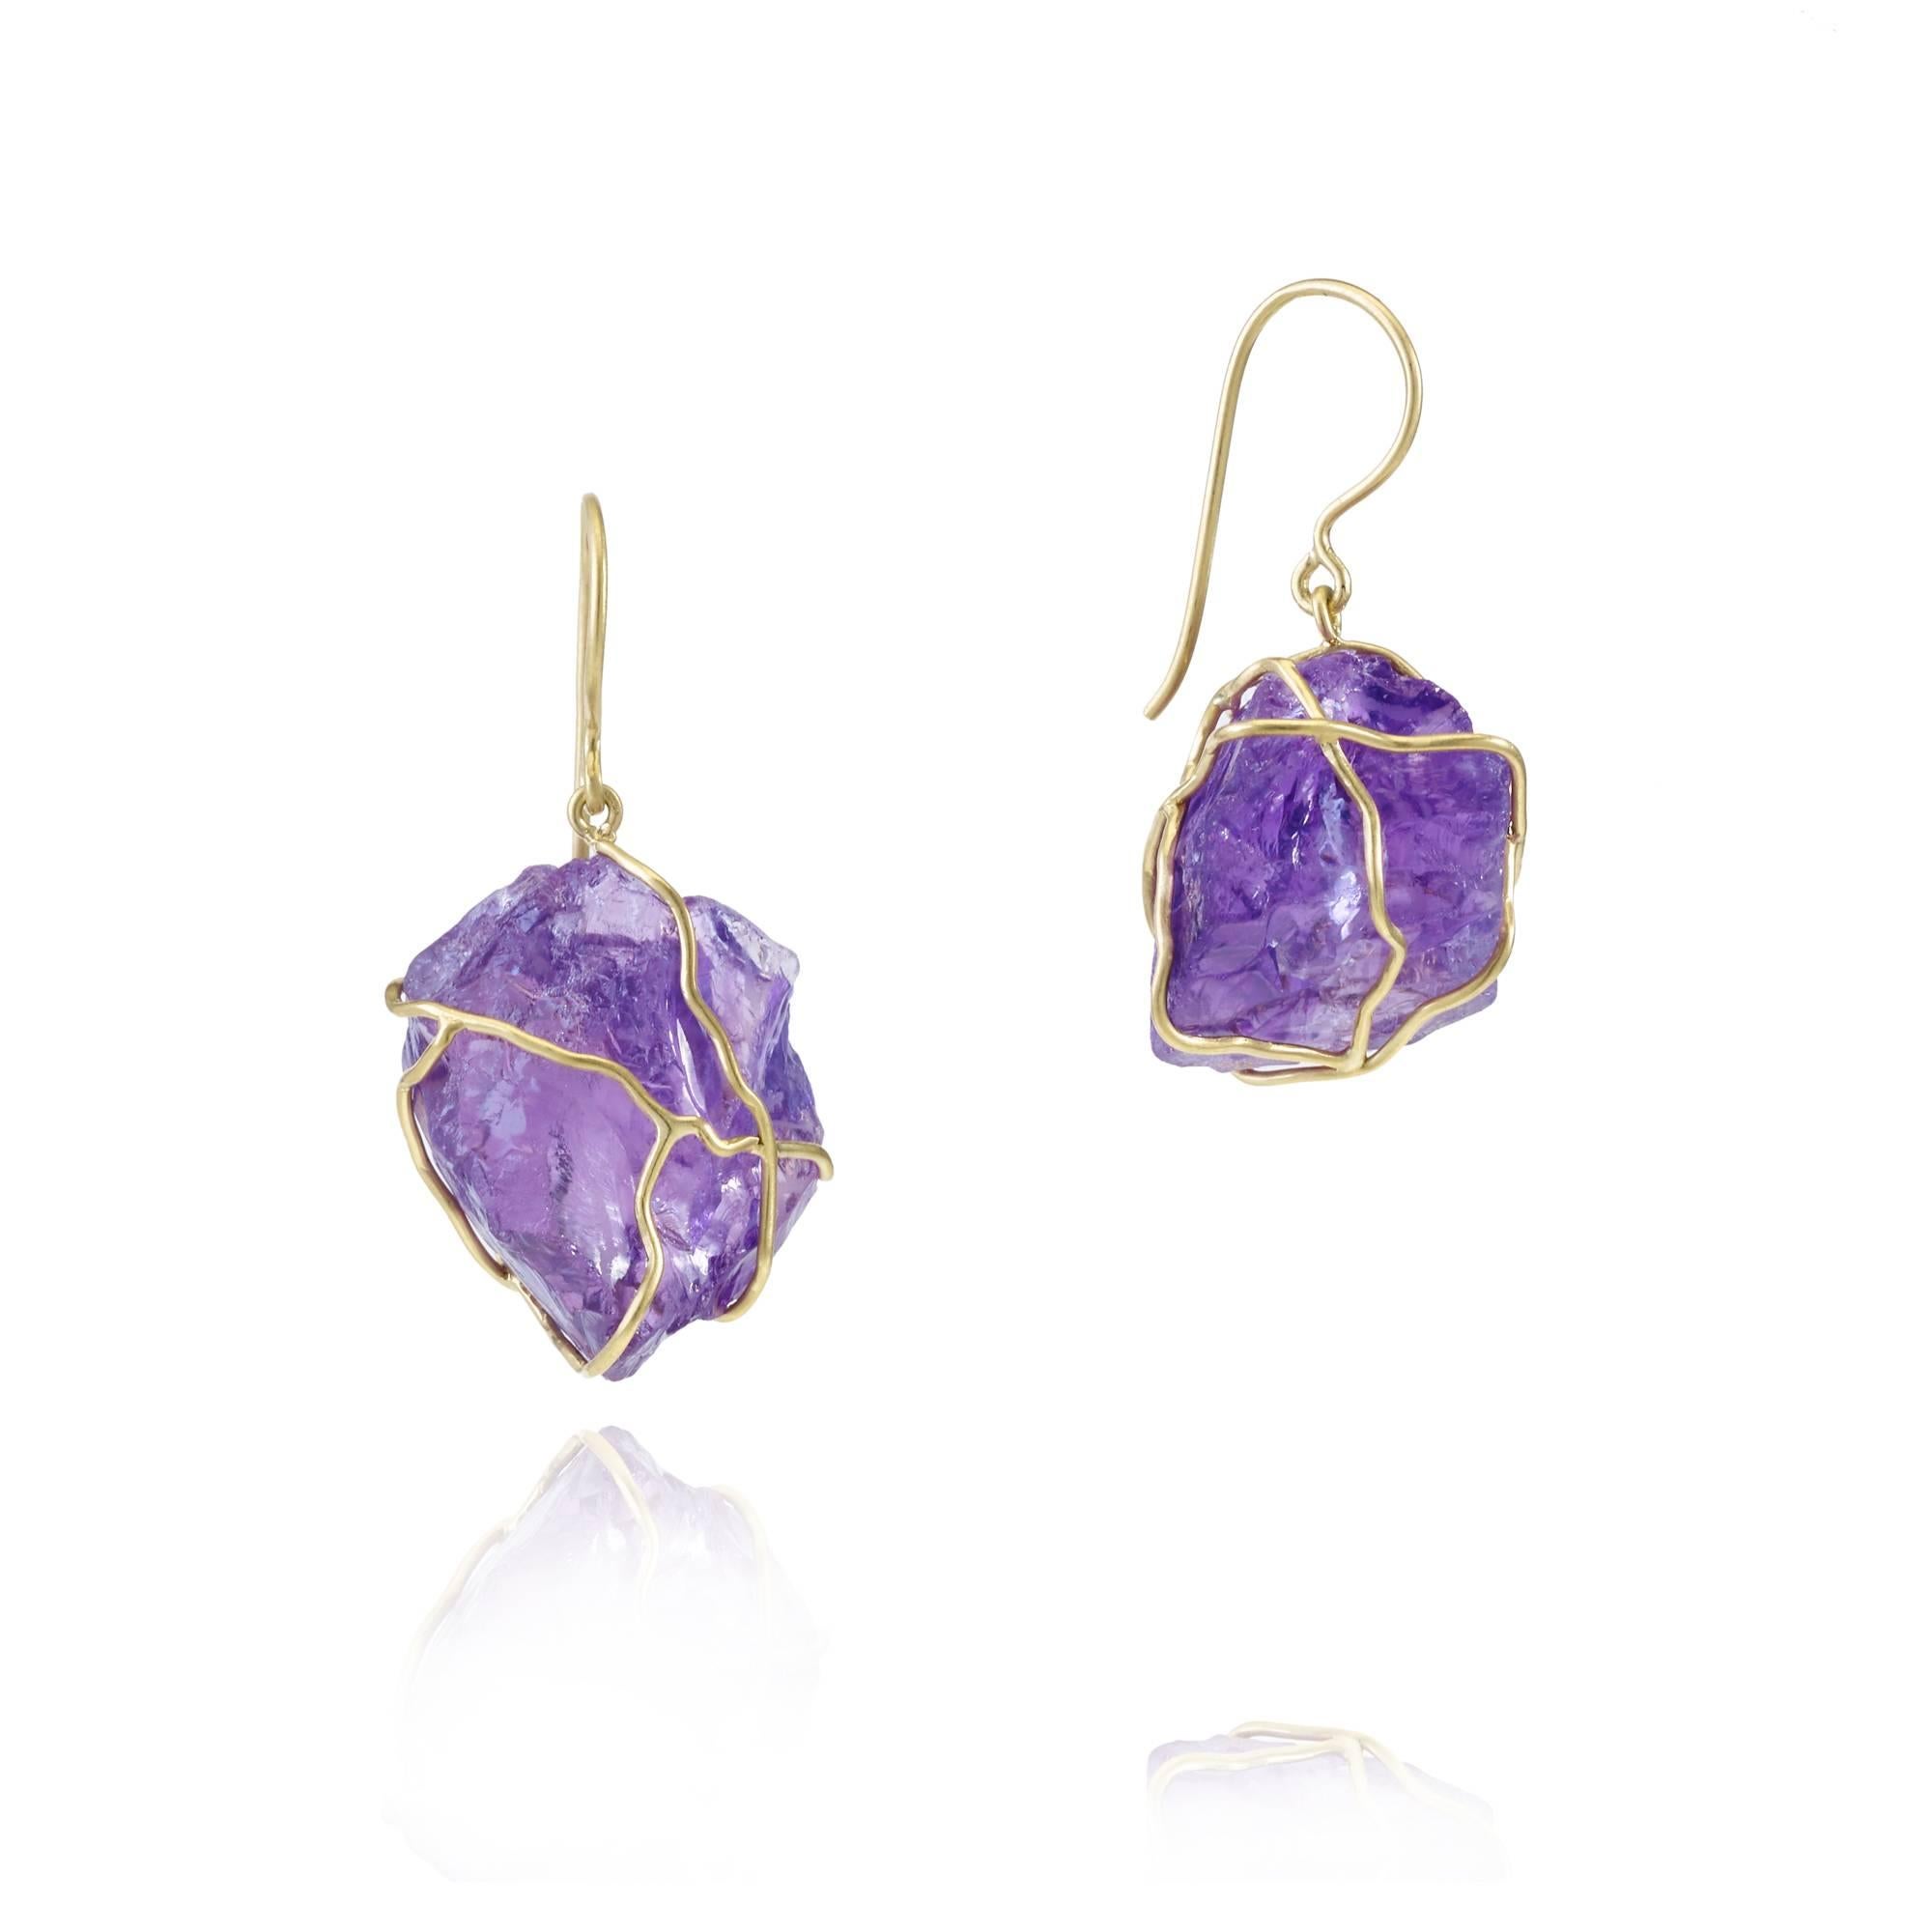 Inspired by the beauty of nature, these beautiful single drop earrings feature a lustrous, uncut Amethyst encased in an 18 Kt Gold wrap setting. Reminiscent of the woven spectacle that is the spiders web, they are the perfect statement piece.